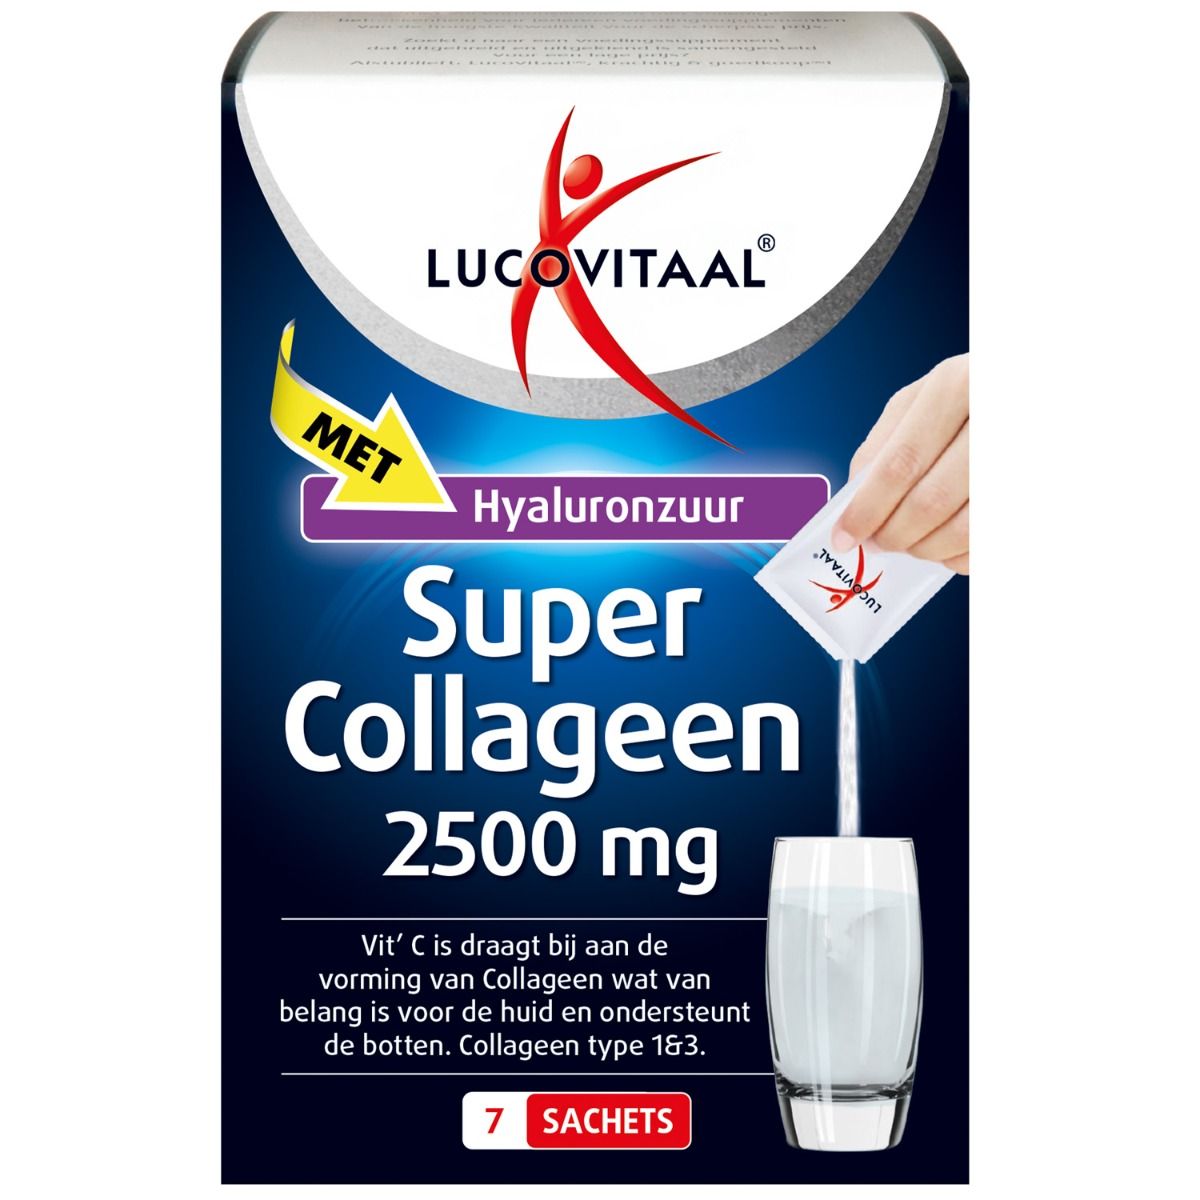 Lucovitaal Collageen super 2500mg 7sachets NUT 472/371